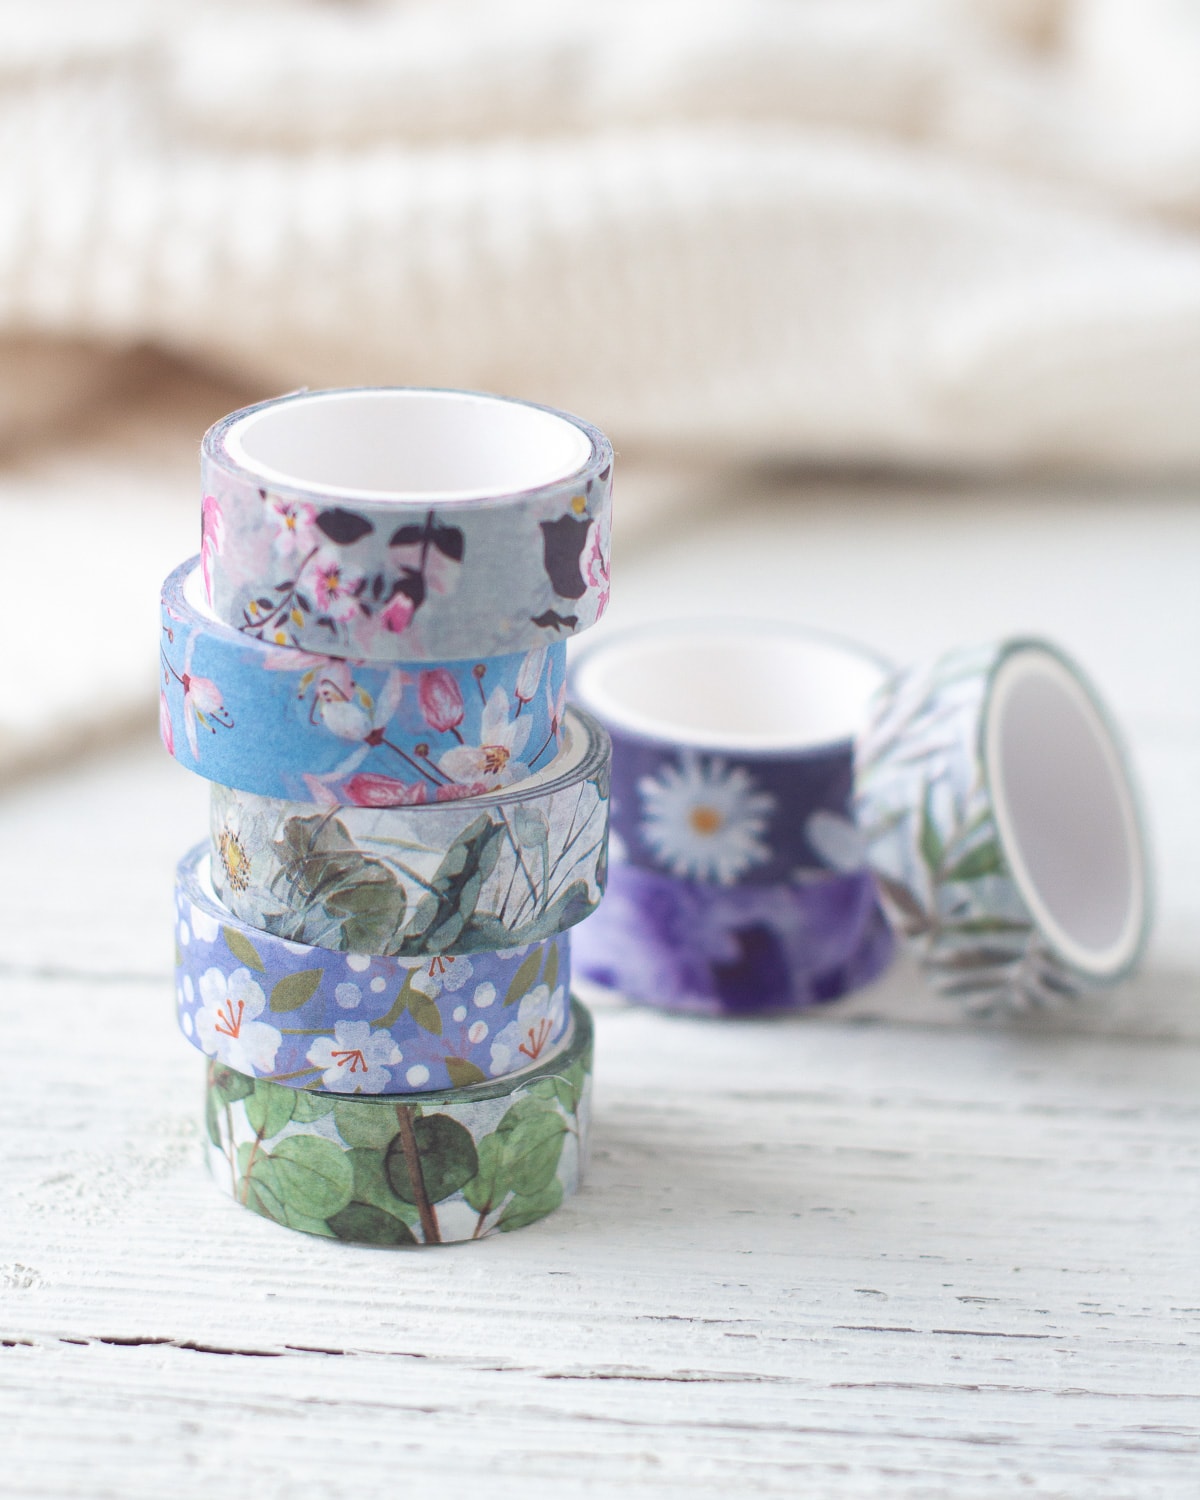 Floral washi tape in a stack.